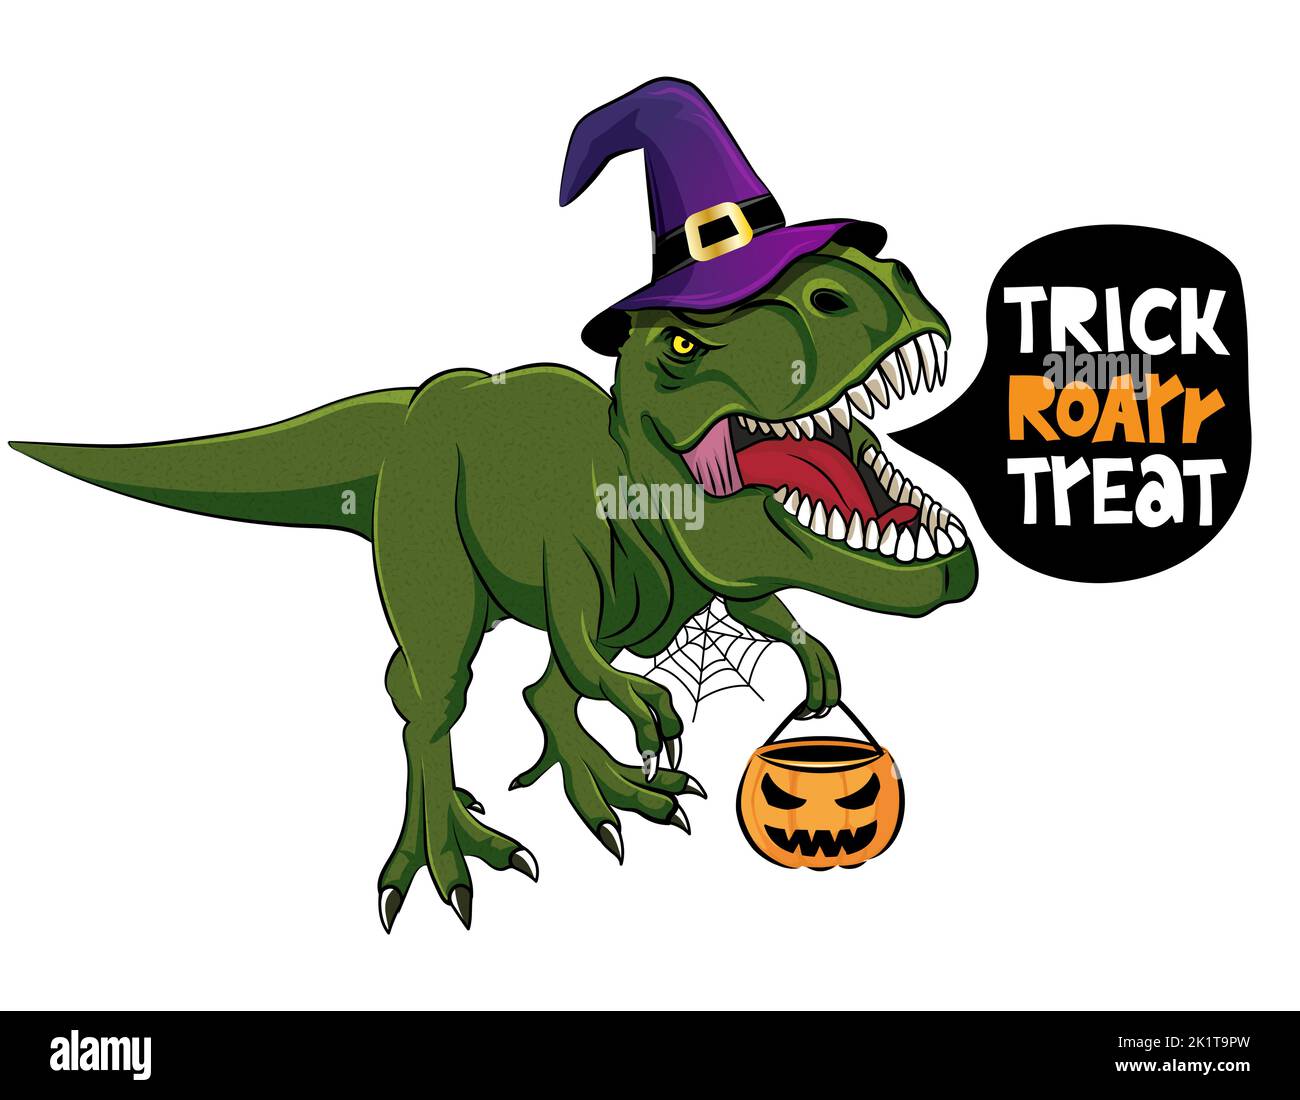 Trick roar treat - T rex tyrannosaurus with witch costume. Cute roaring happy dinosaur with witch hat. Dino character in cartoon style. Happy Hallowee Stock Vector